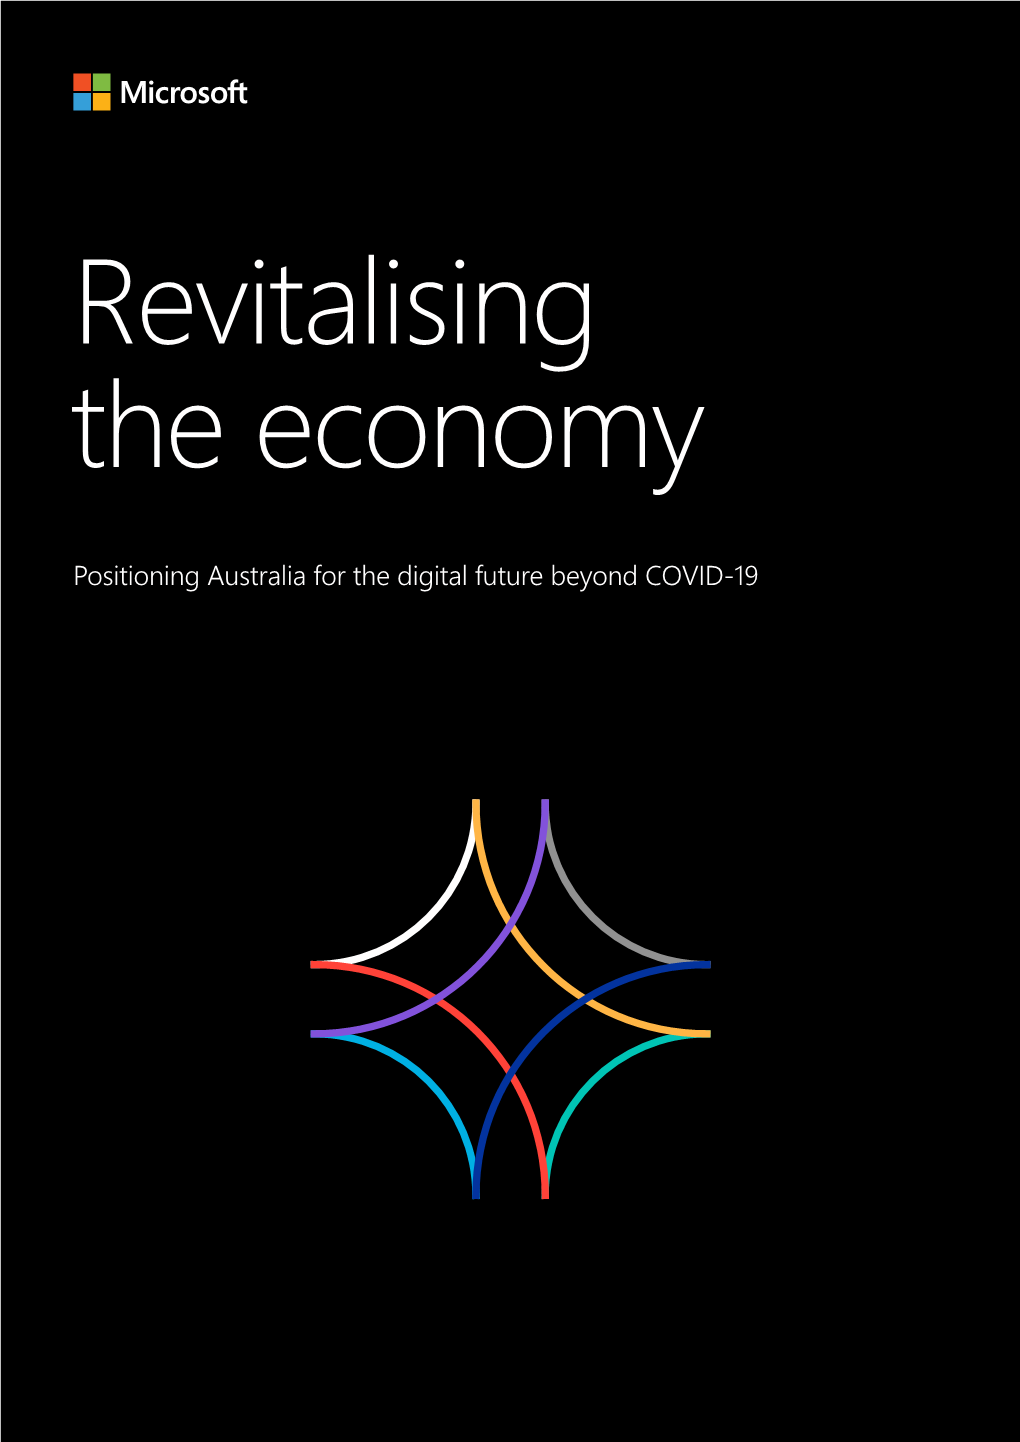 Positioning Australia for the Digital Future Beyond COVID-19